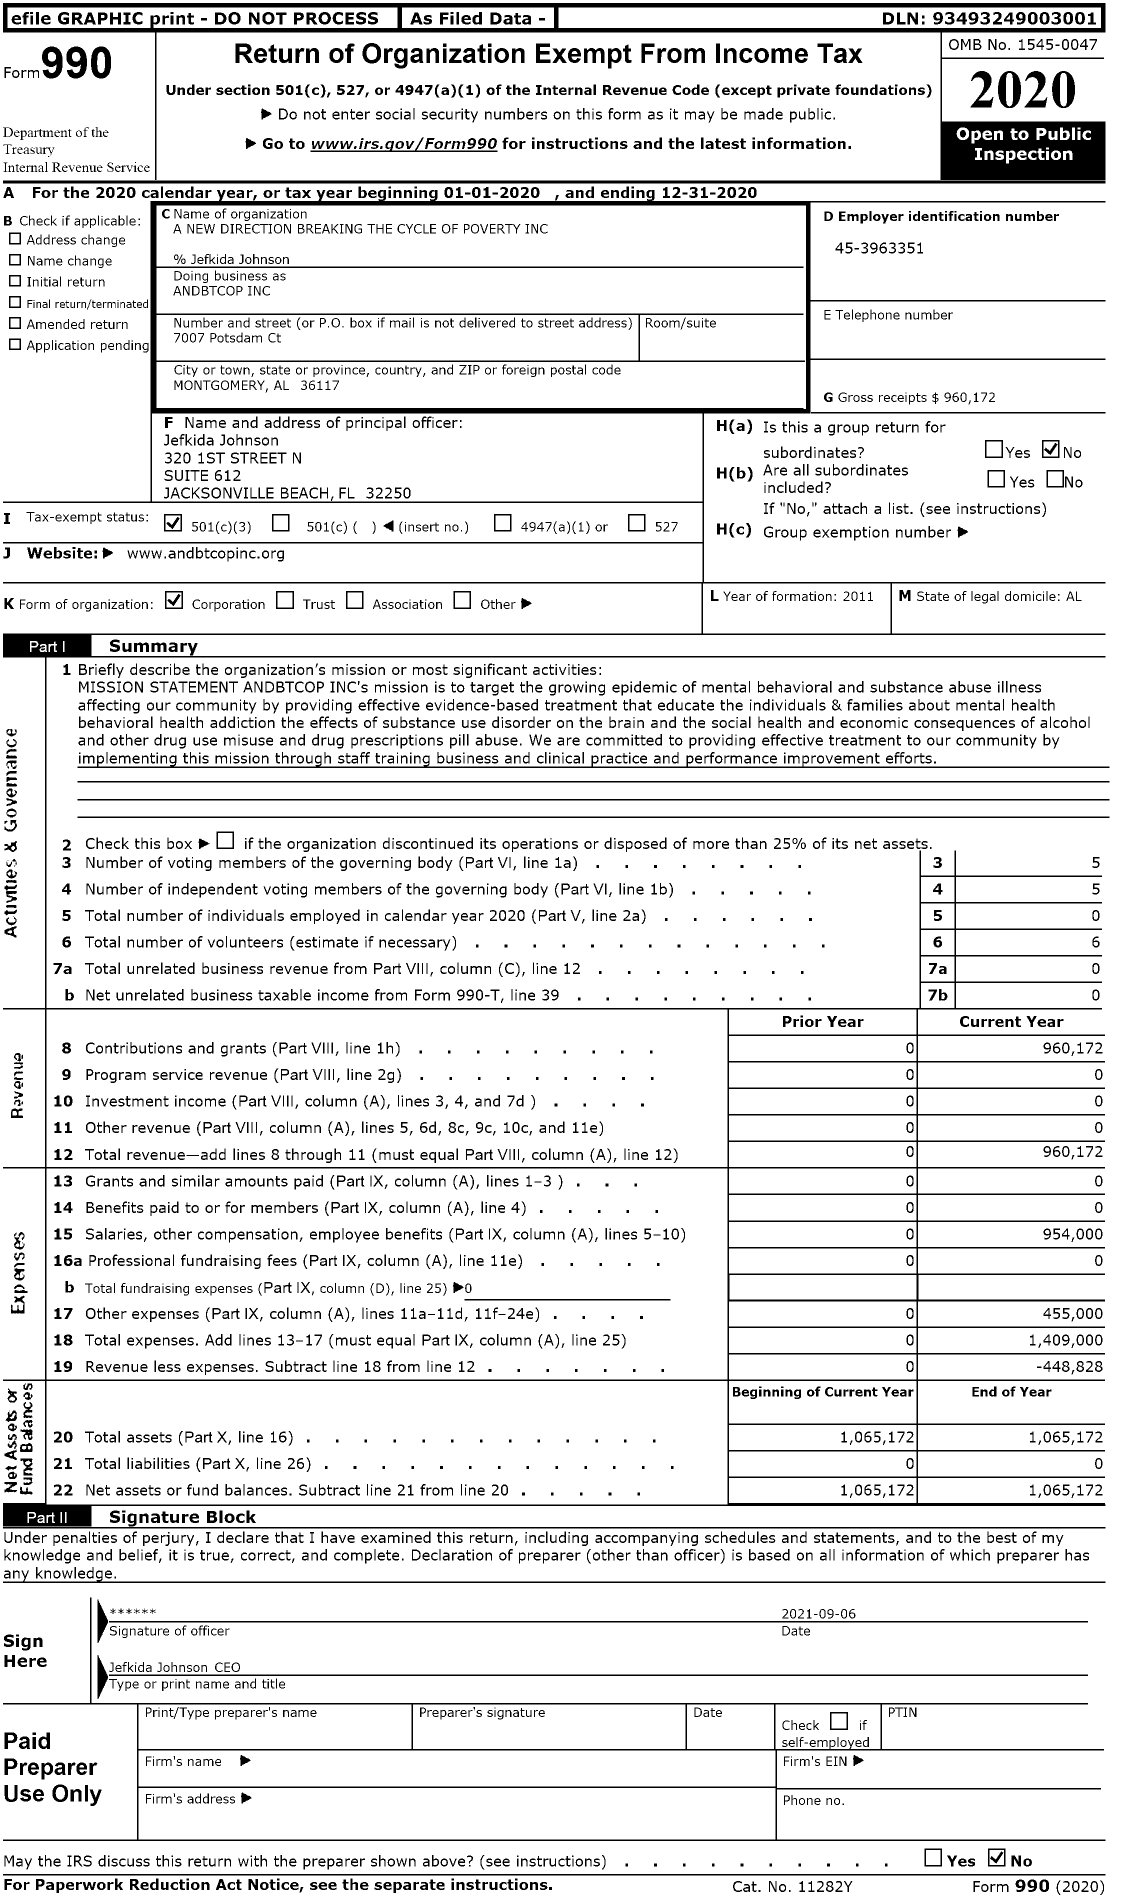 Image of first page of 2020 Form 990 for Andbtcop